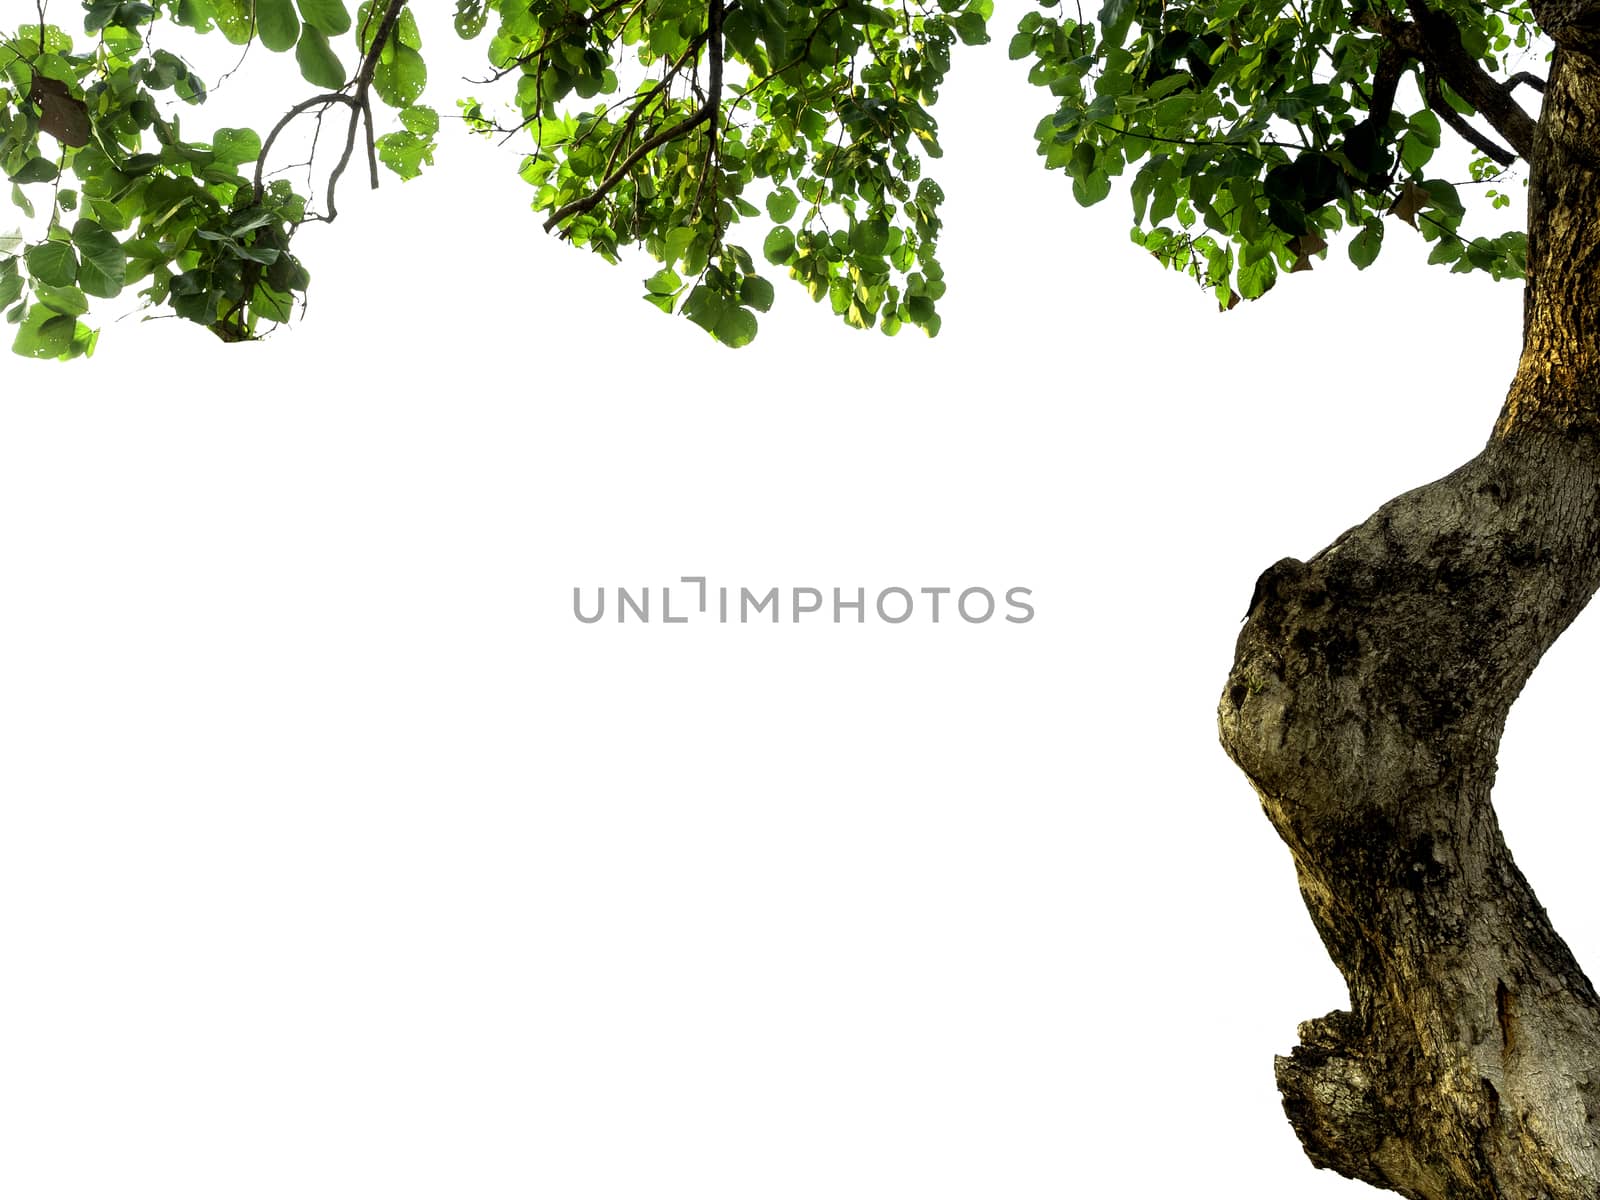 The isolate of the tree part consists of trunks, branches, and leaves on a white background with a clipping path.